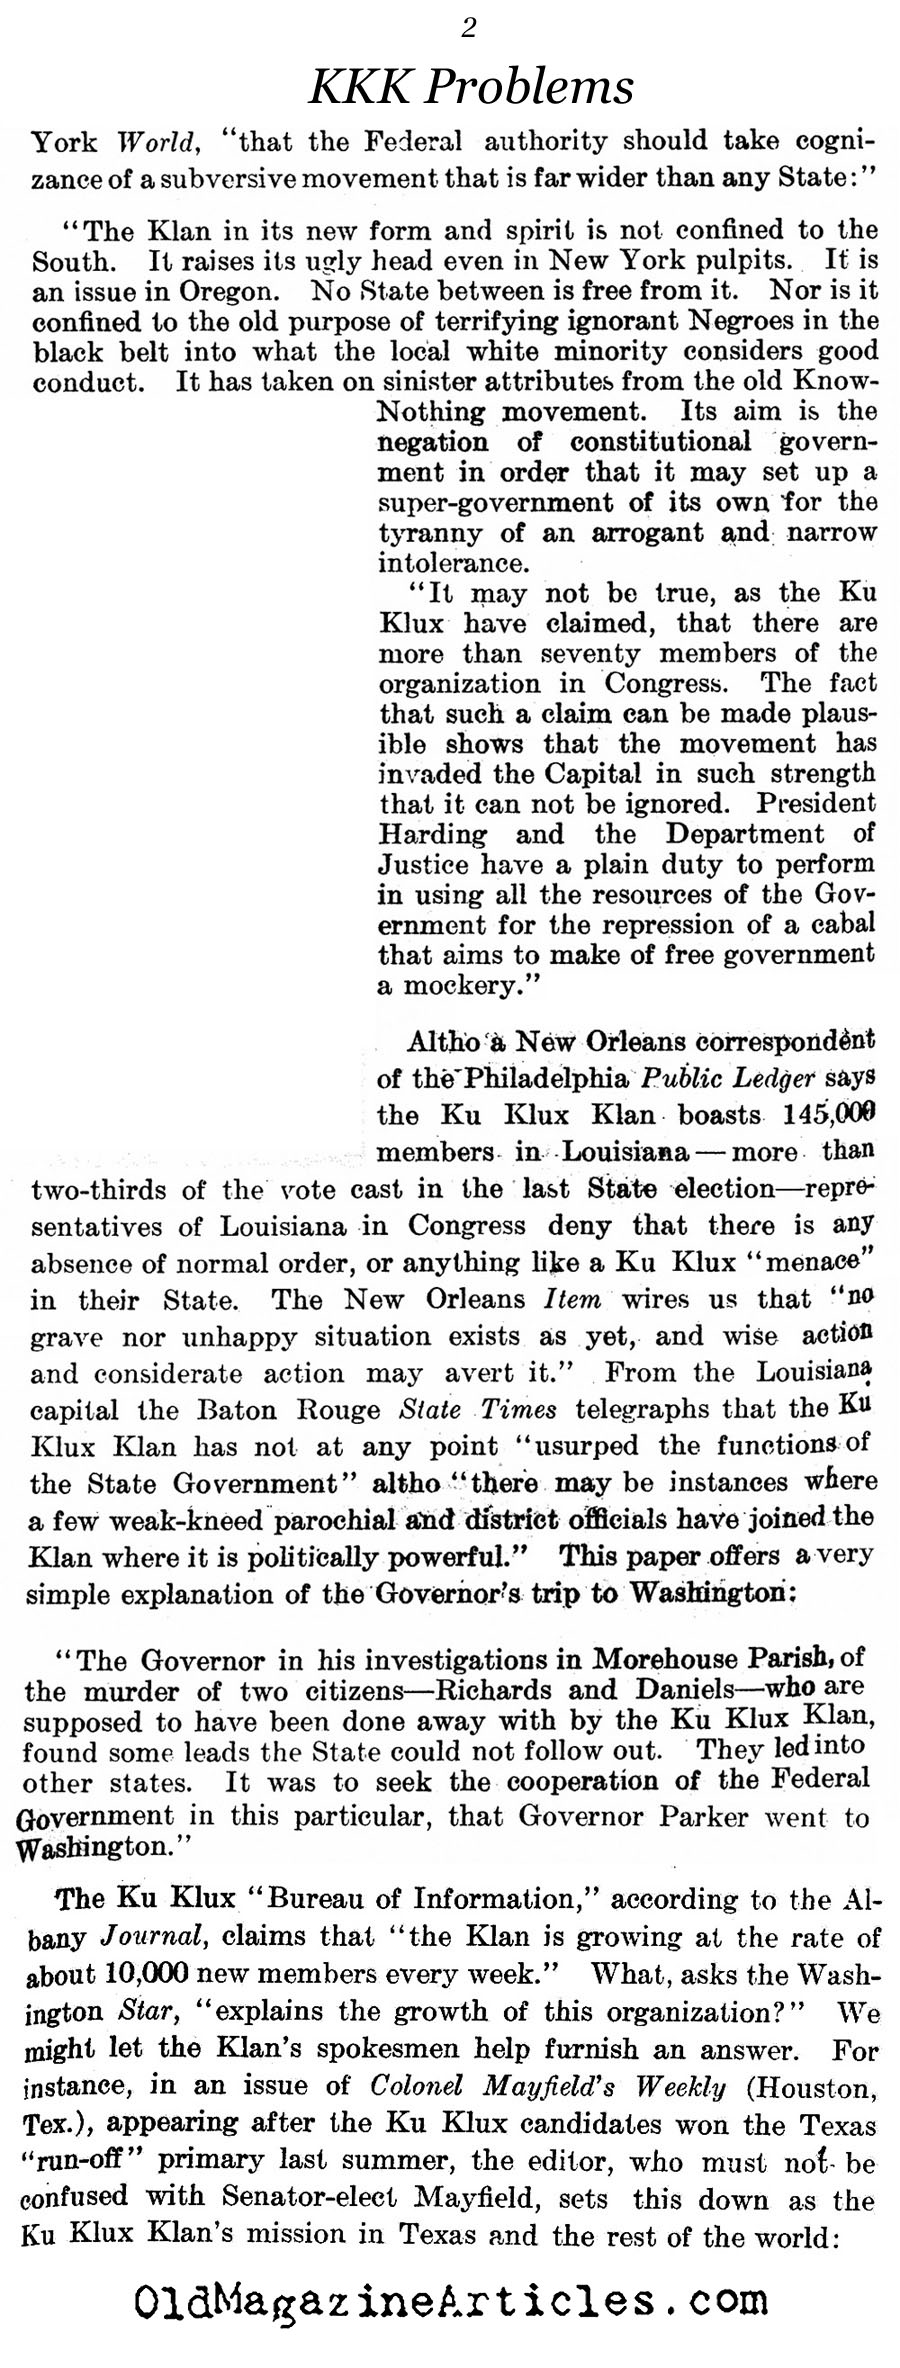 The Klan as a National Problem  (The Literary Digest, 1922)